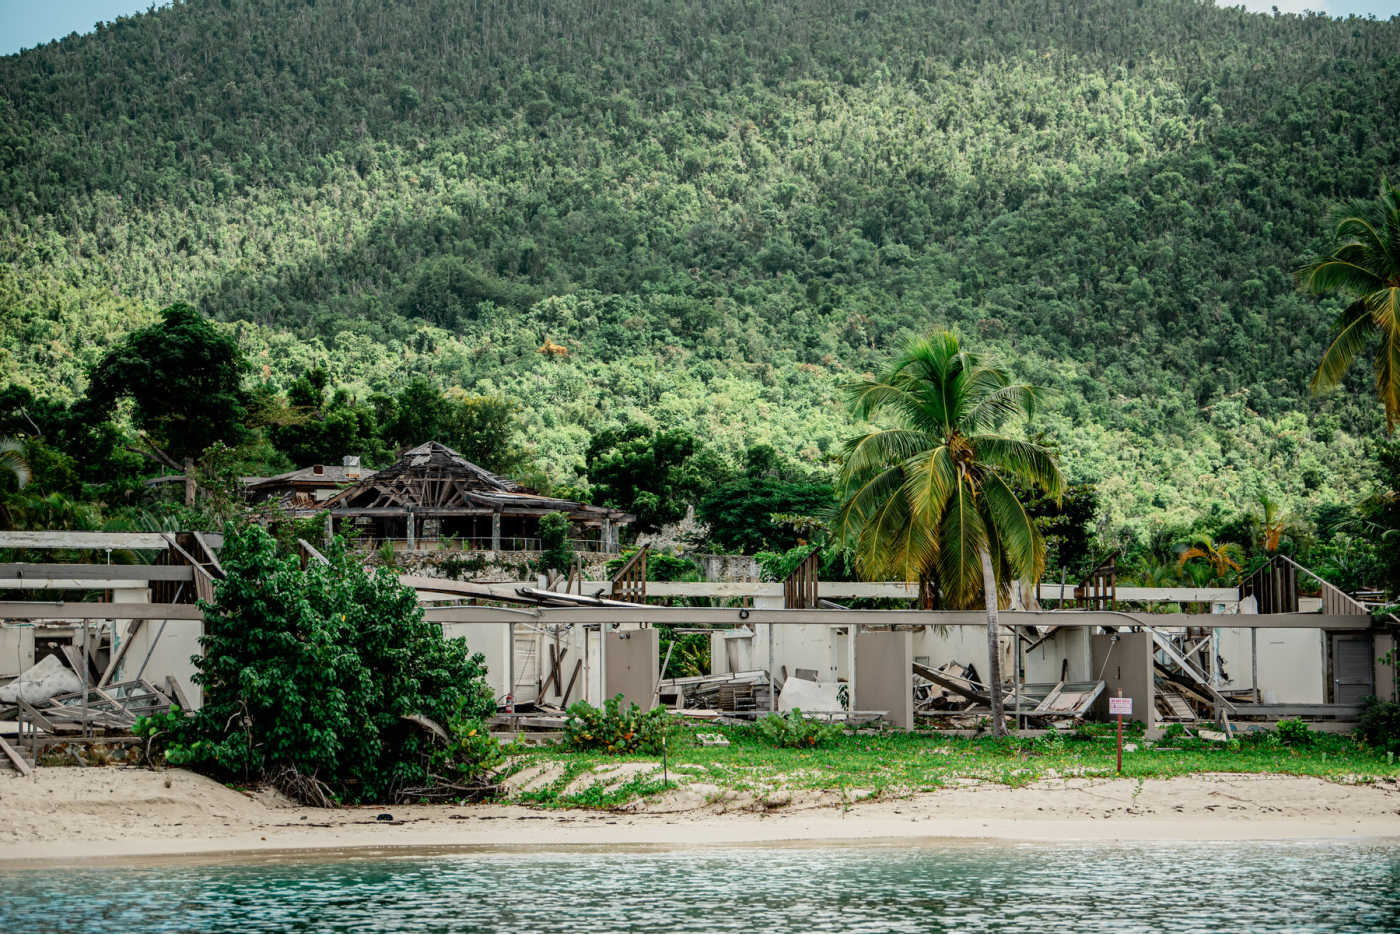 What Do You Think About the Proposed Redevelopment of Caneel Bay? The